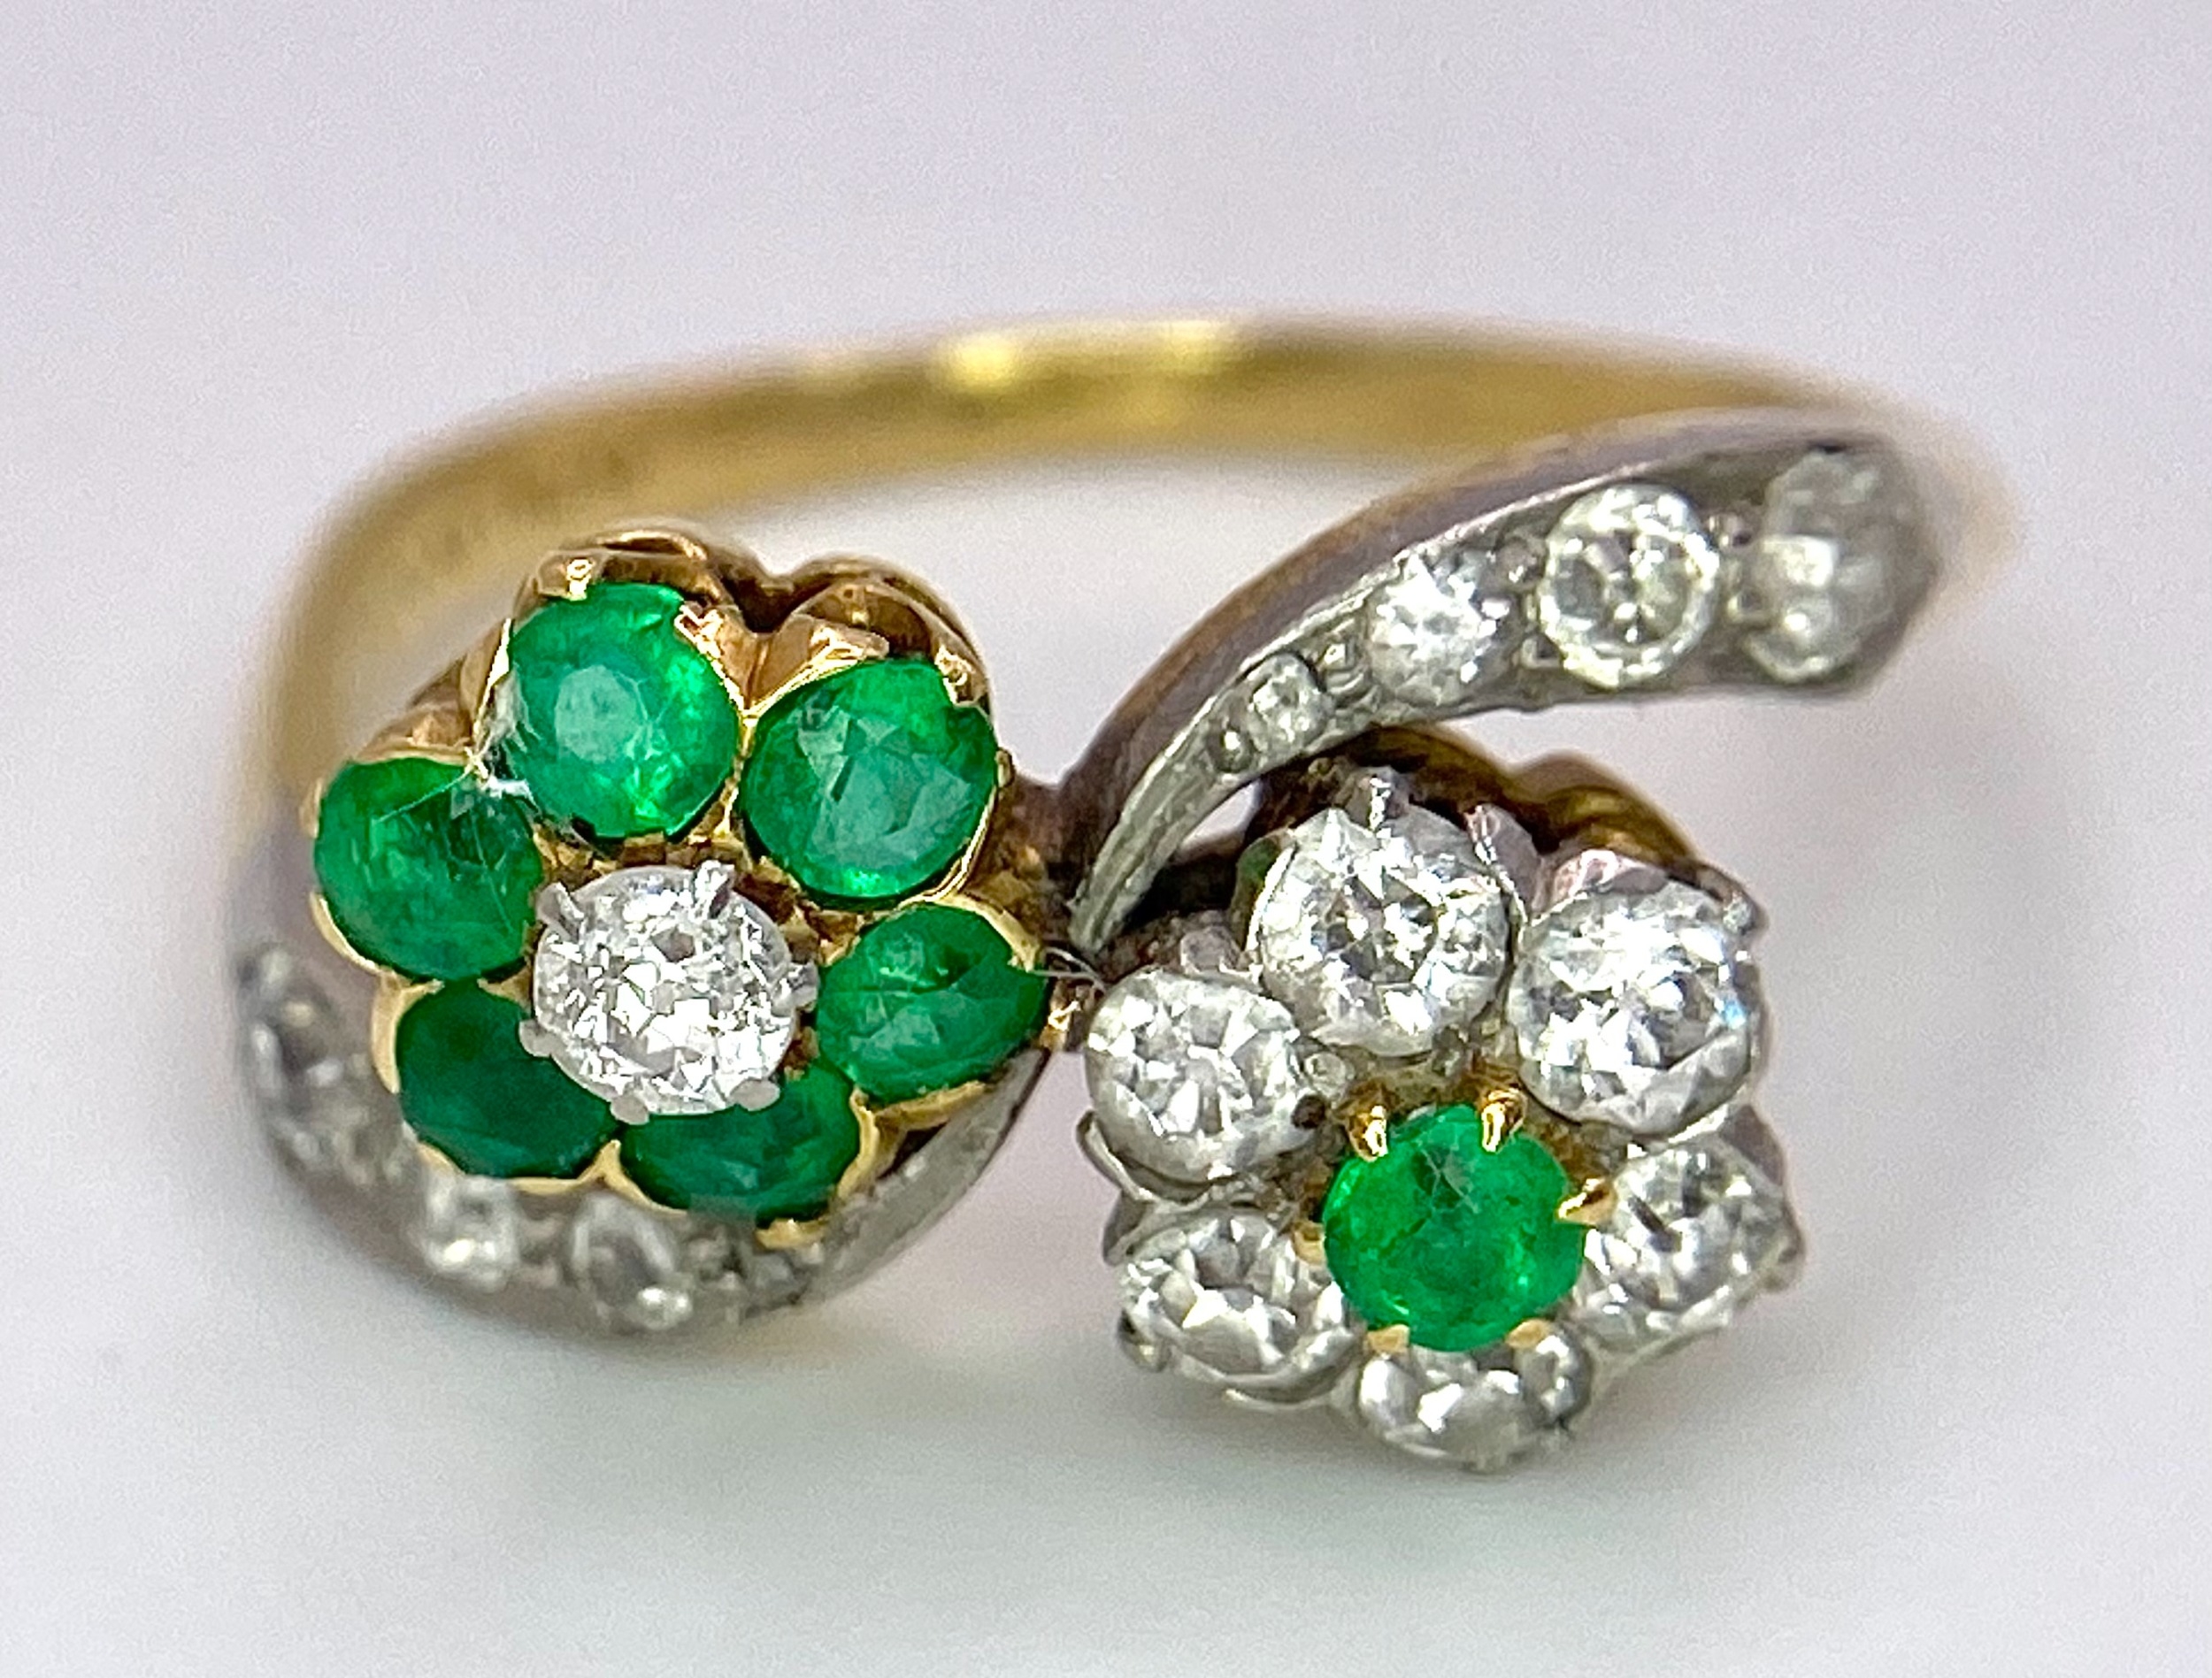 A Vintage 18K Yellow Gold, Platinum, Emerald and Diamond Crossover Ring. Reverse flowers with - Image 7 of 9